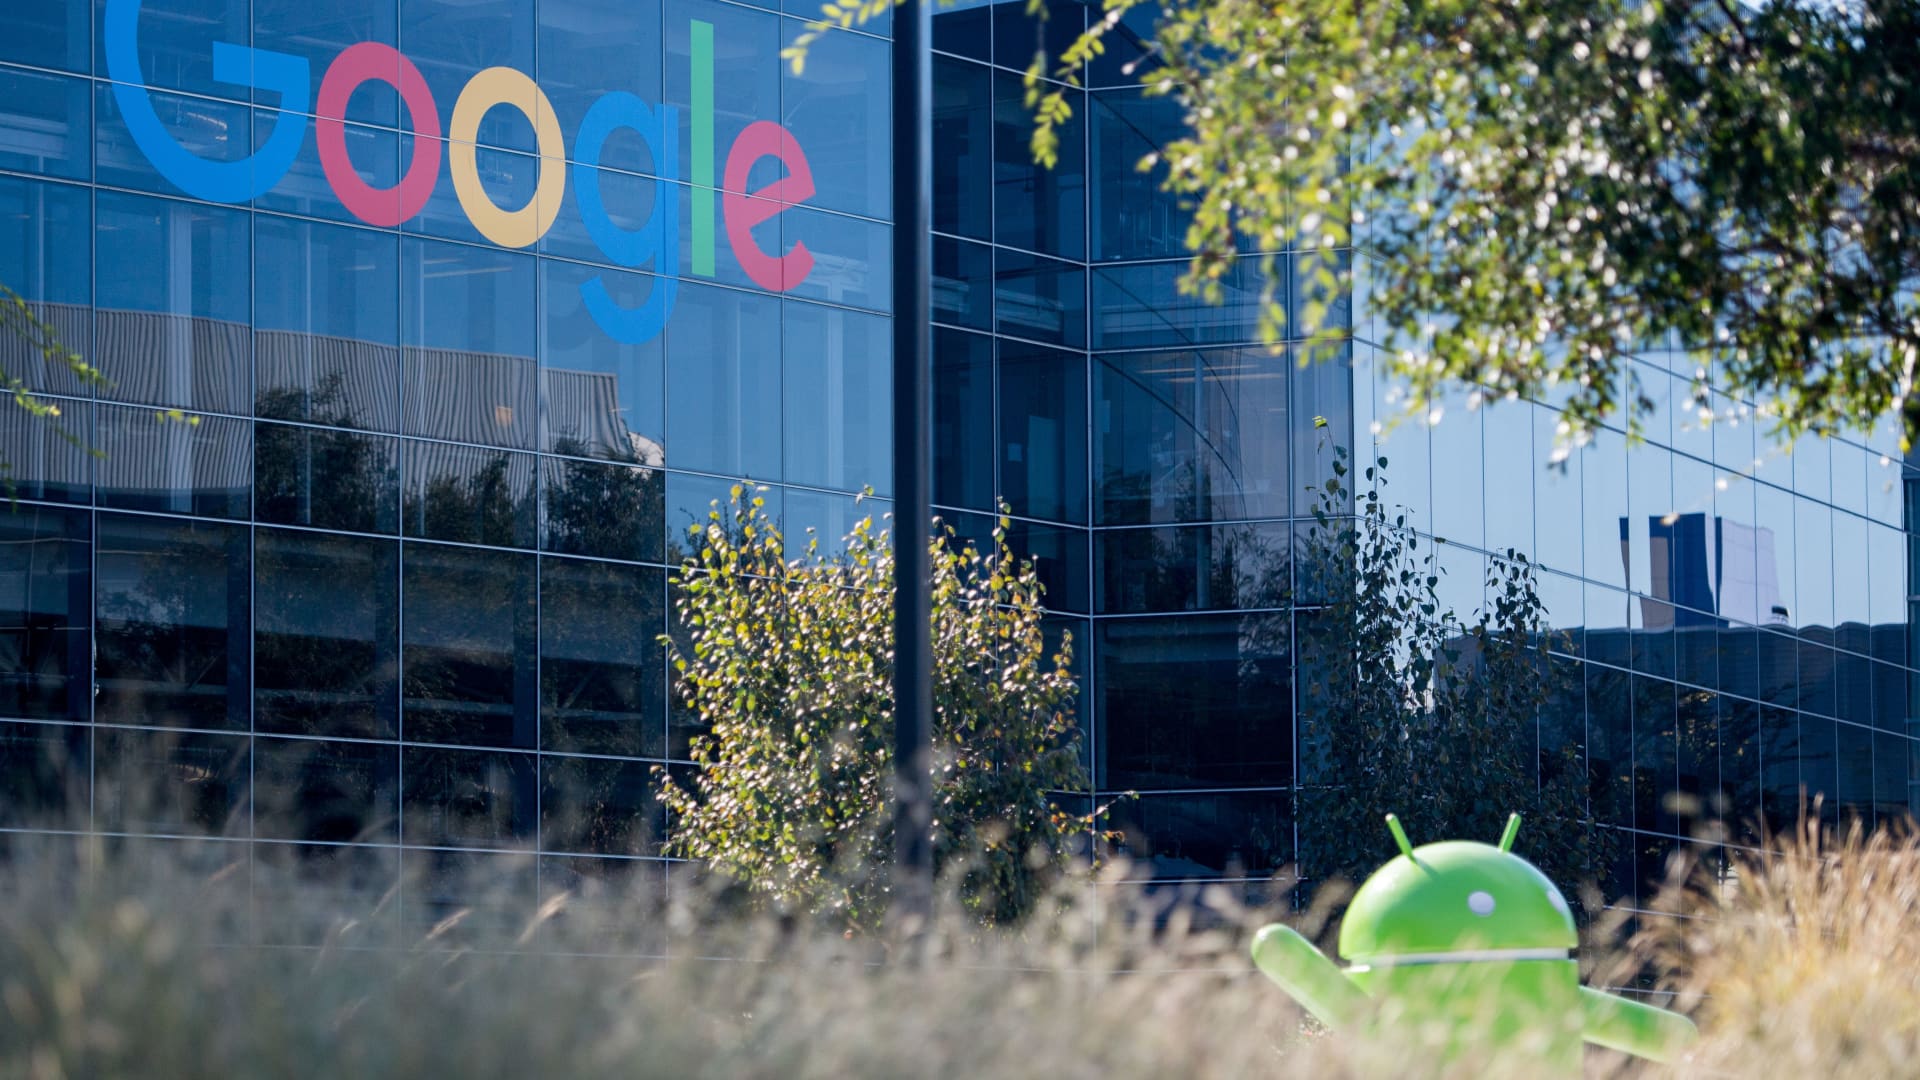 Google is testing facial recognition tech for campus security at an office near Seattle; people entering the building will not be able to opt out (Jennifer Elias/CNBC)